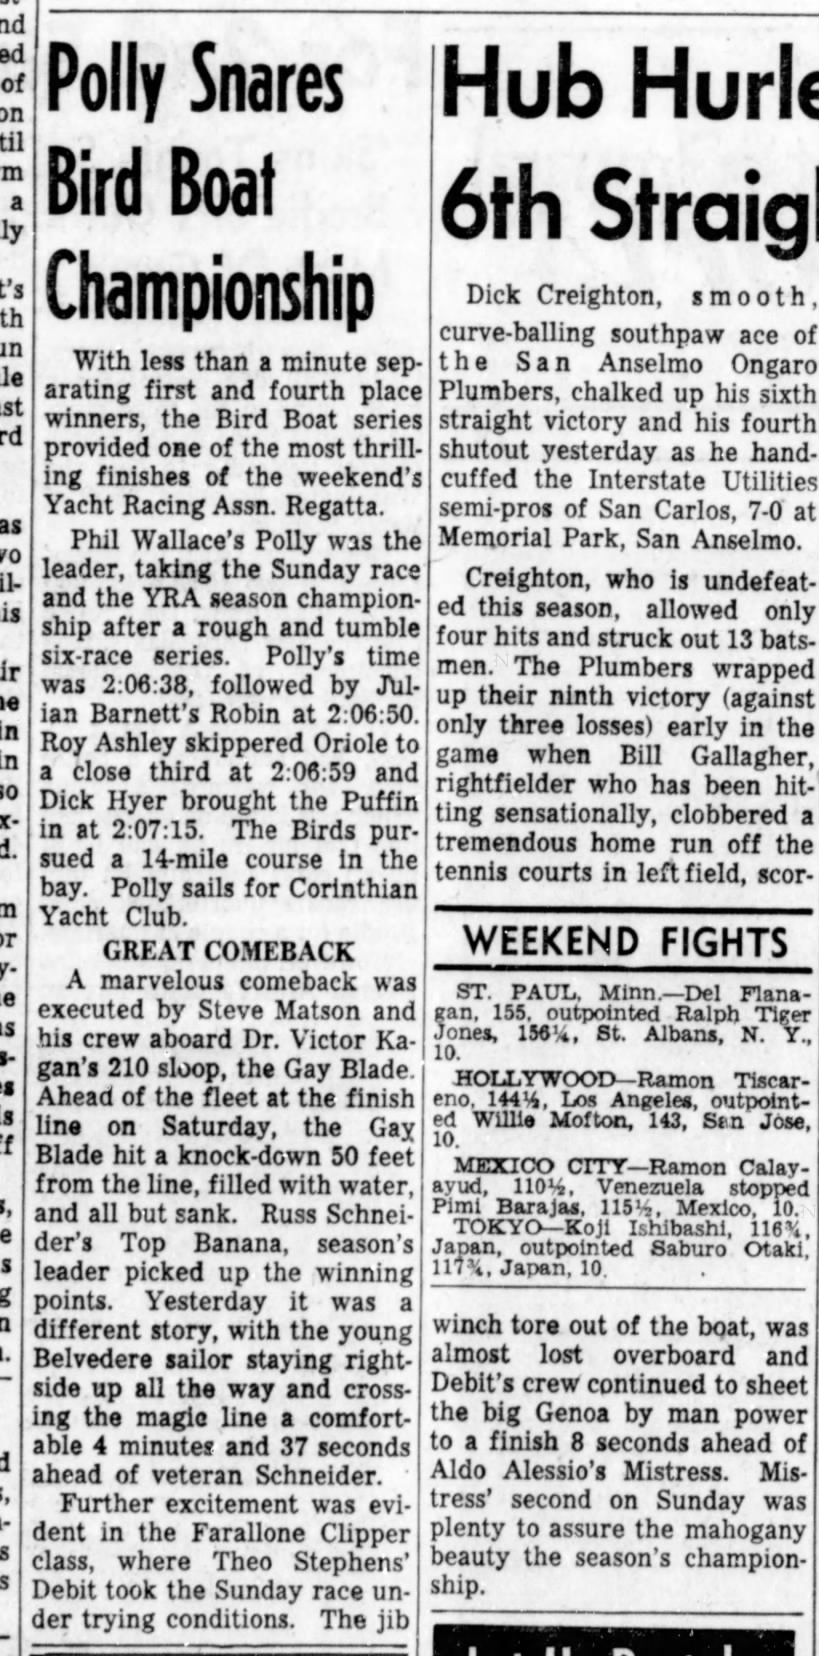 26 Aug 1957 Daily Ind Jnl "Polly Snares Bird Boat Championship"